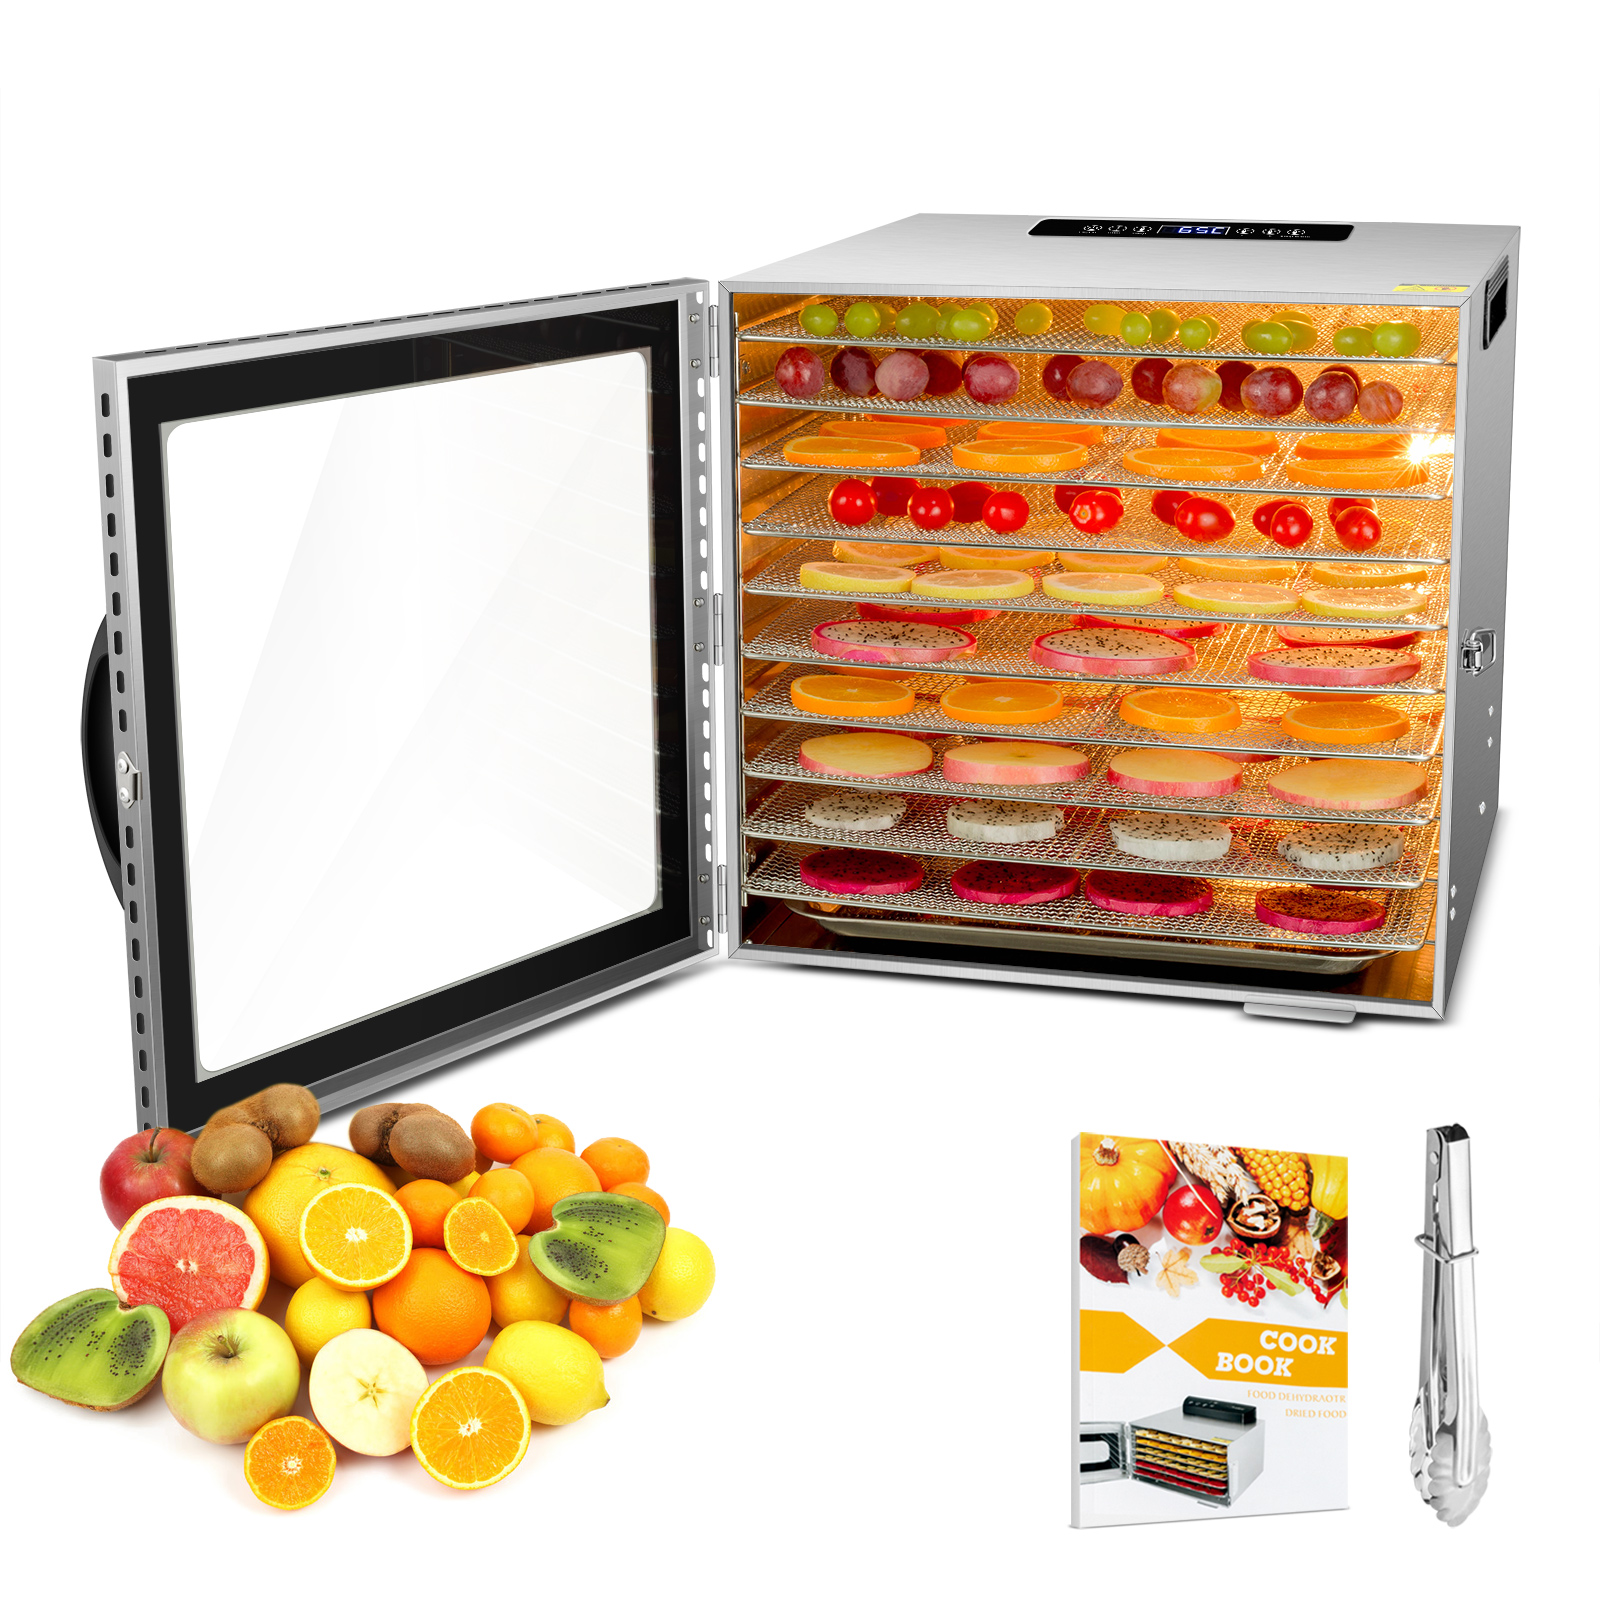 [Copy]2022 Kwasyo New 10 Trays Best Fruit Dehydrator 1000W Professional Adjustable Temperature Control and 0~24 Hours Digital Timer with Glass Window & 67 Recipes